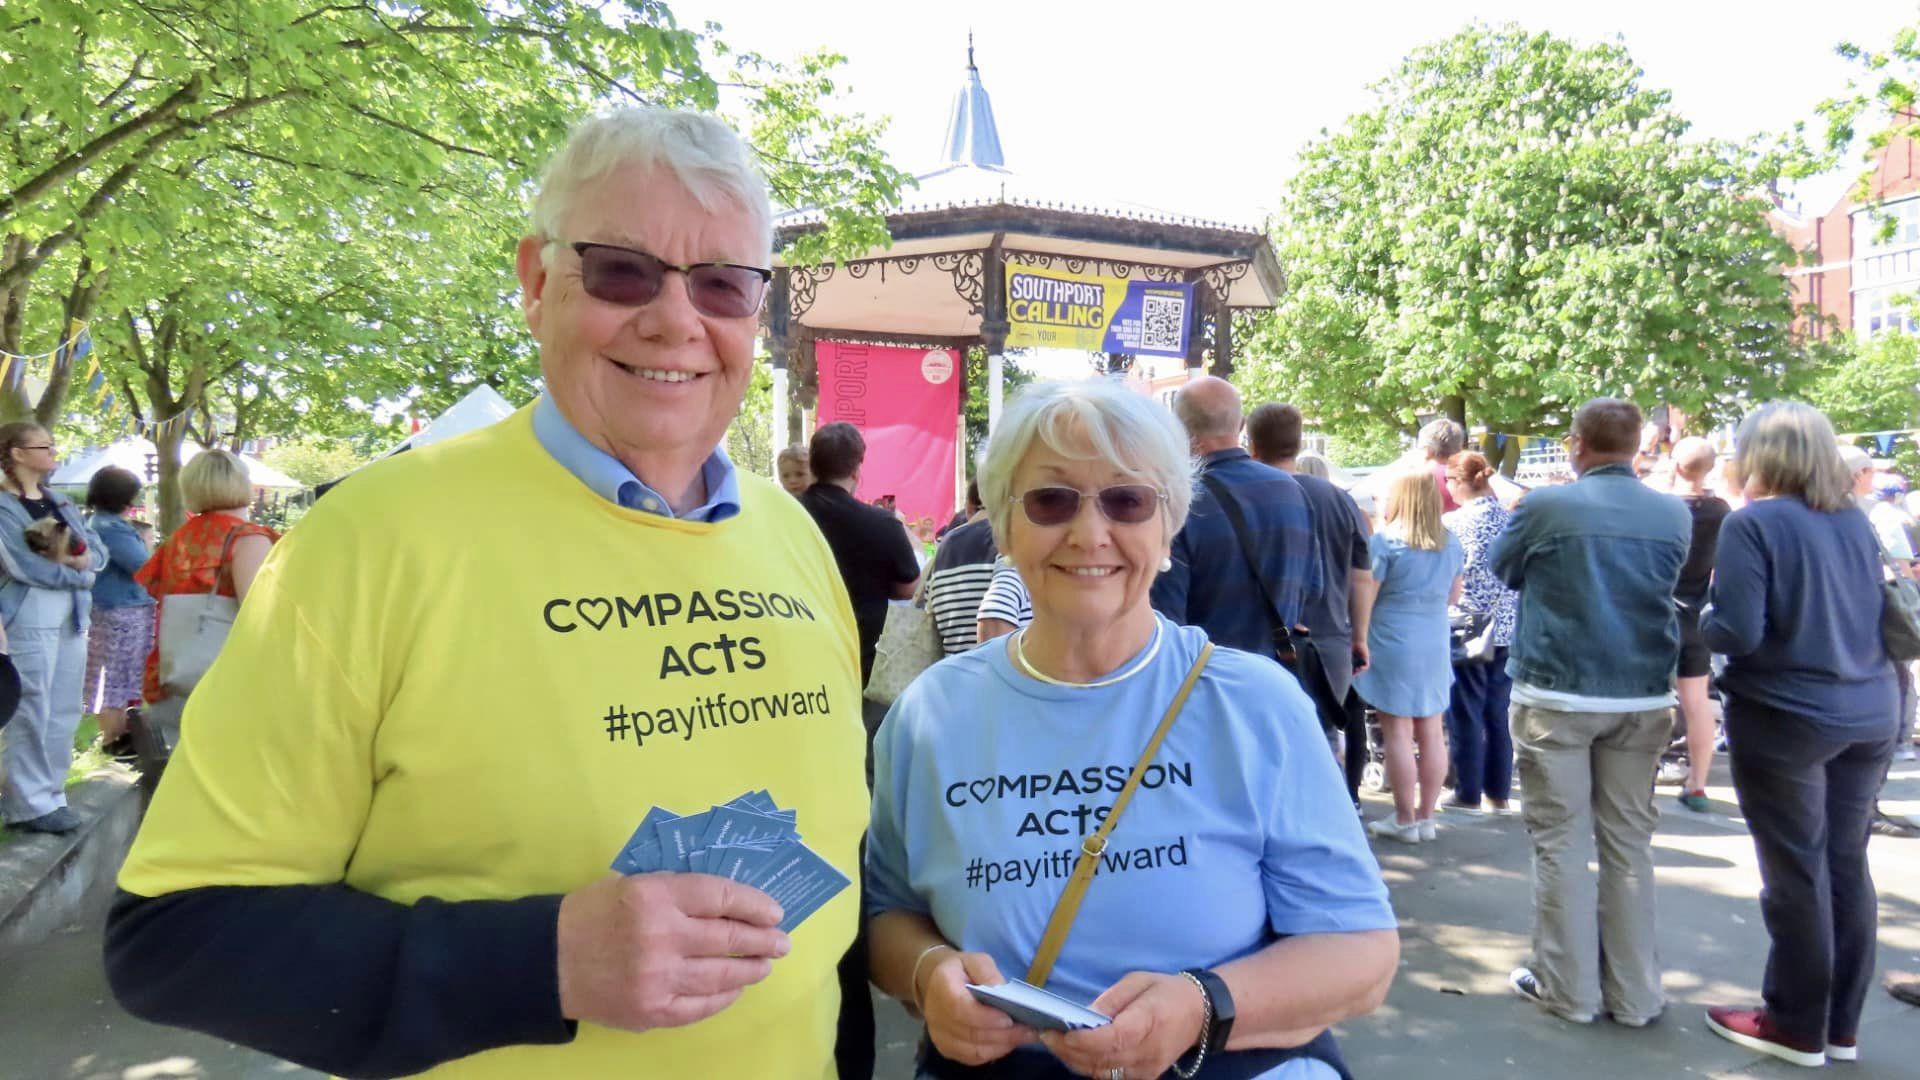 Crowds enjoyed the Southport Calling Eurovision party in Southport town centre organised by Southport BID. Volunteers from Compassion Acts